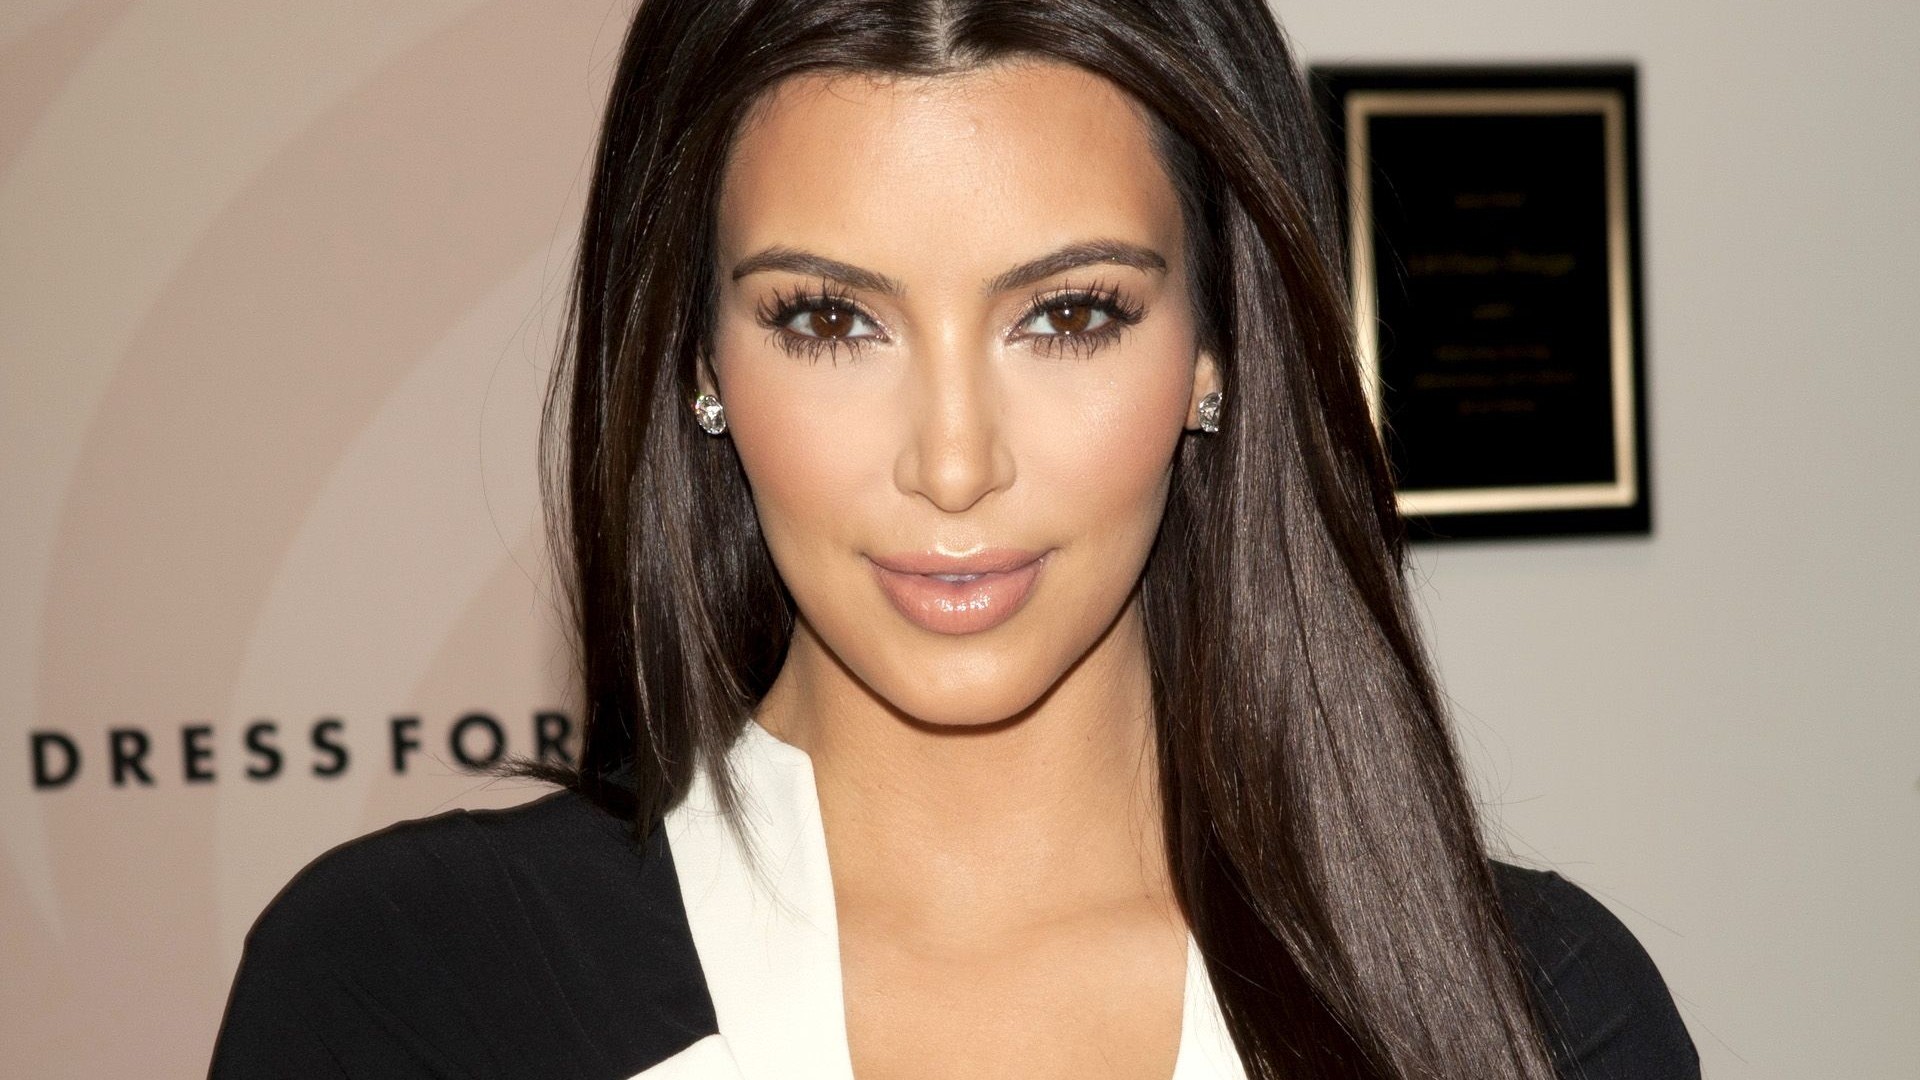 Kim Kardashian Without Makeup: See How Different She Looks Before and After Her Beauty Routine!